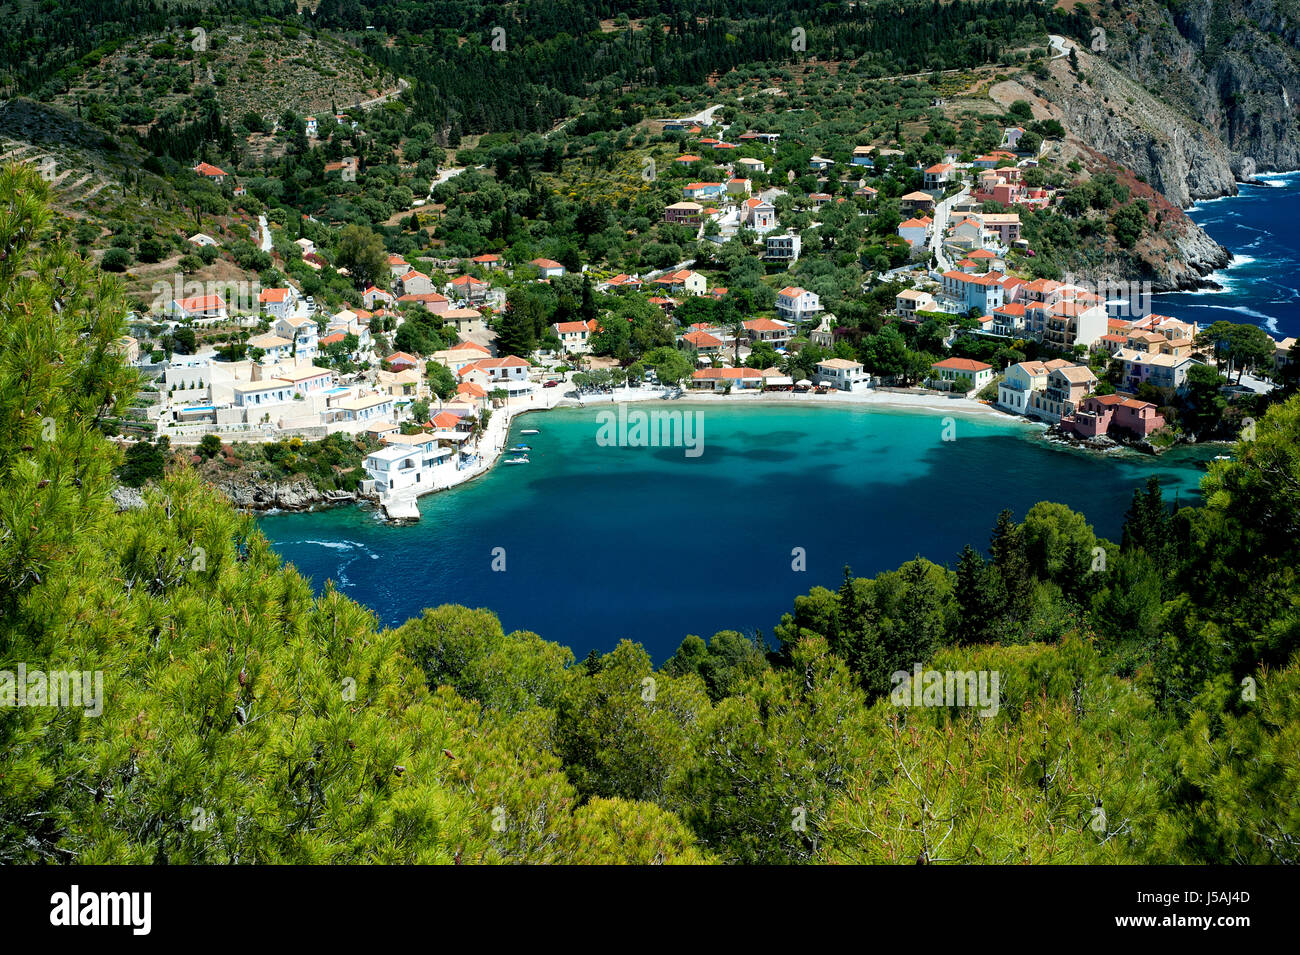 Assos, Kefalonia, Greece, 2017. The village of Assos is located on and around a narrow isthmus and a beautiful bay on the holiday island of Kefalonia. Stock Photo